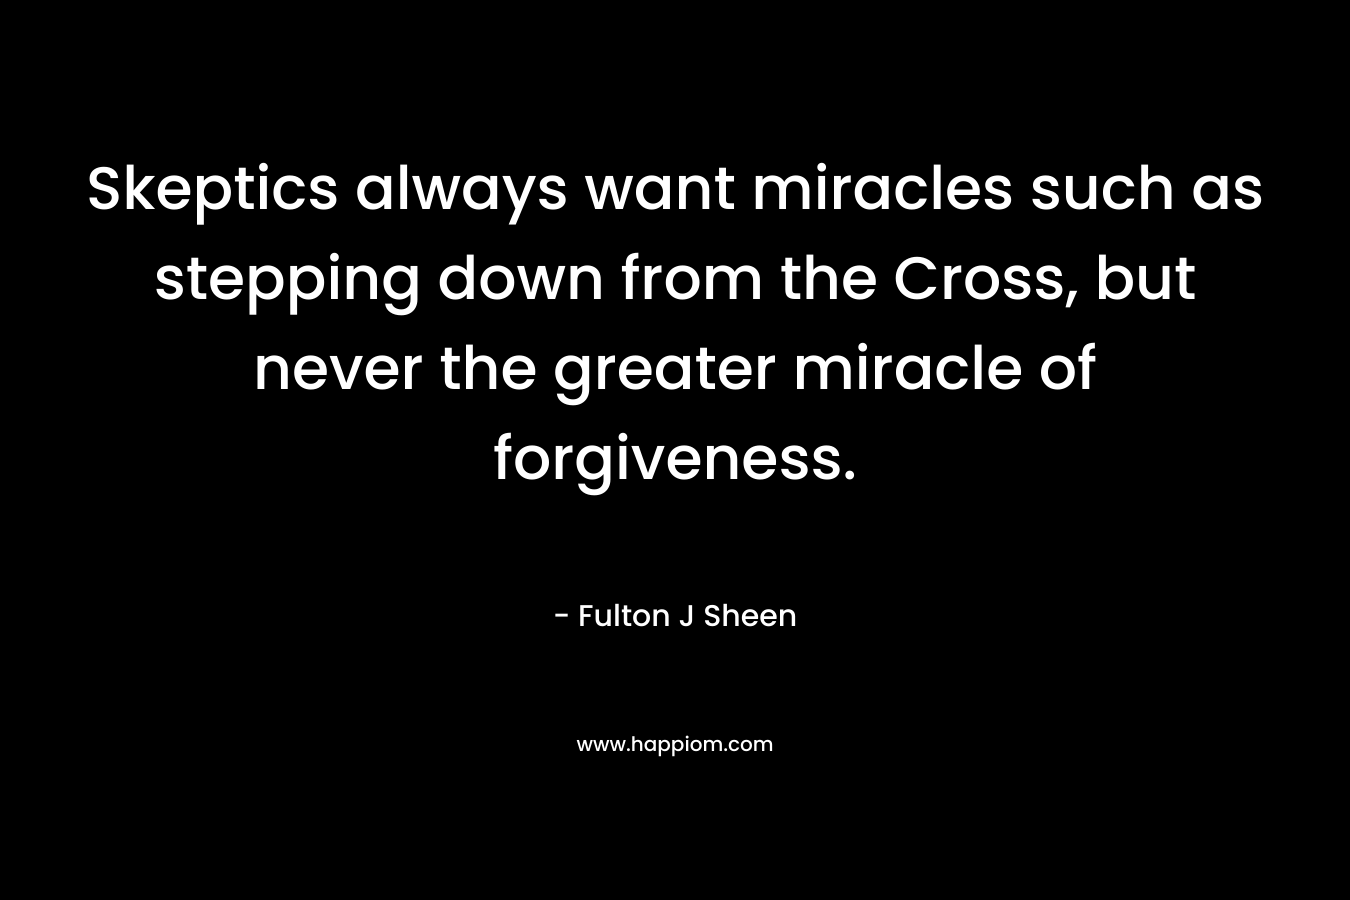 Skeptics always want miracles such as stepping down from the Cross, but never the greater miracle of forgiveness. – Fulton J Sheen